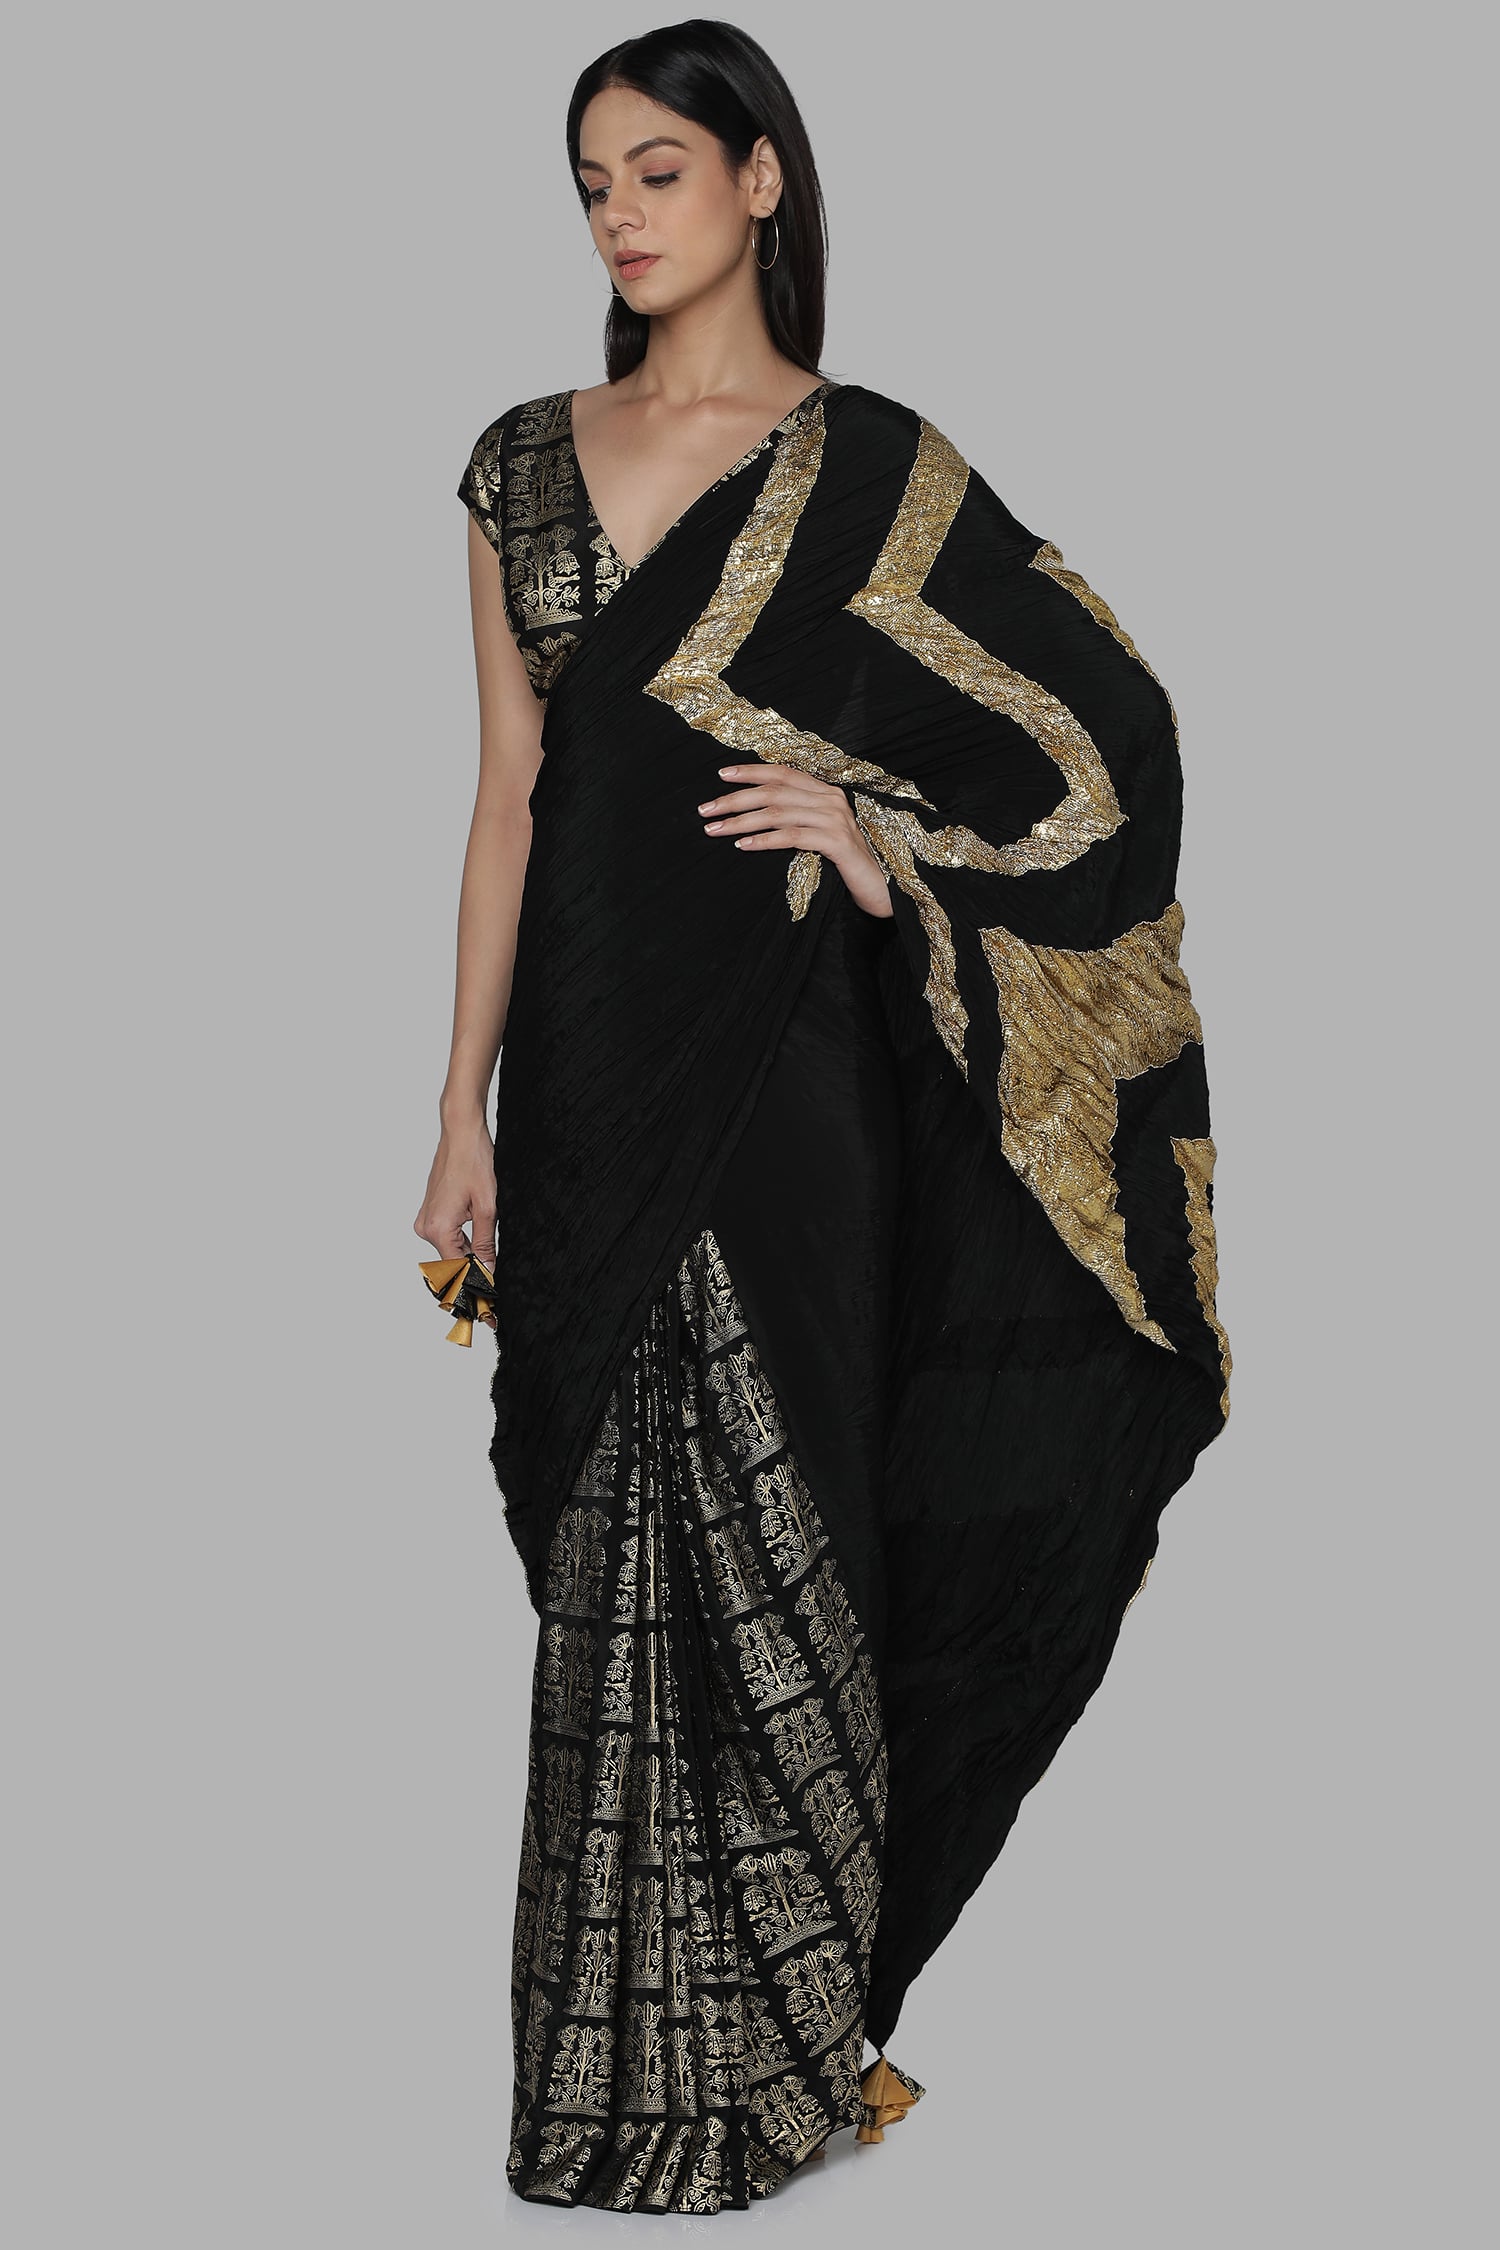 Black Crinkle Gota Palla Sari with Bunch of Birds Pre- Pleats Pleats and Blouse Piece - The Grand Trunk